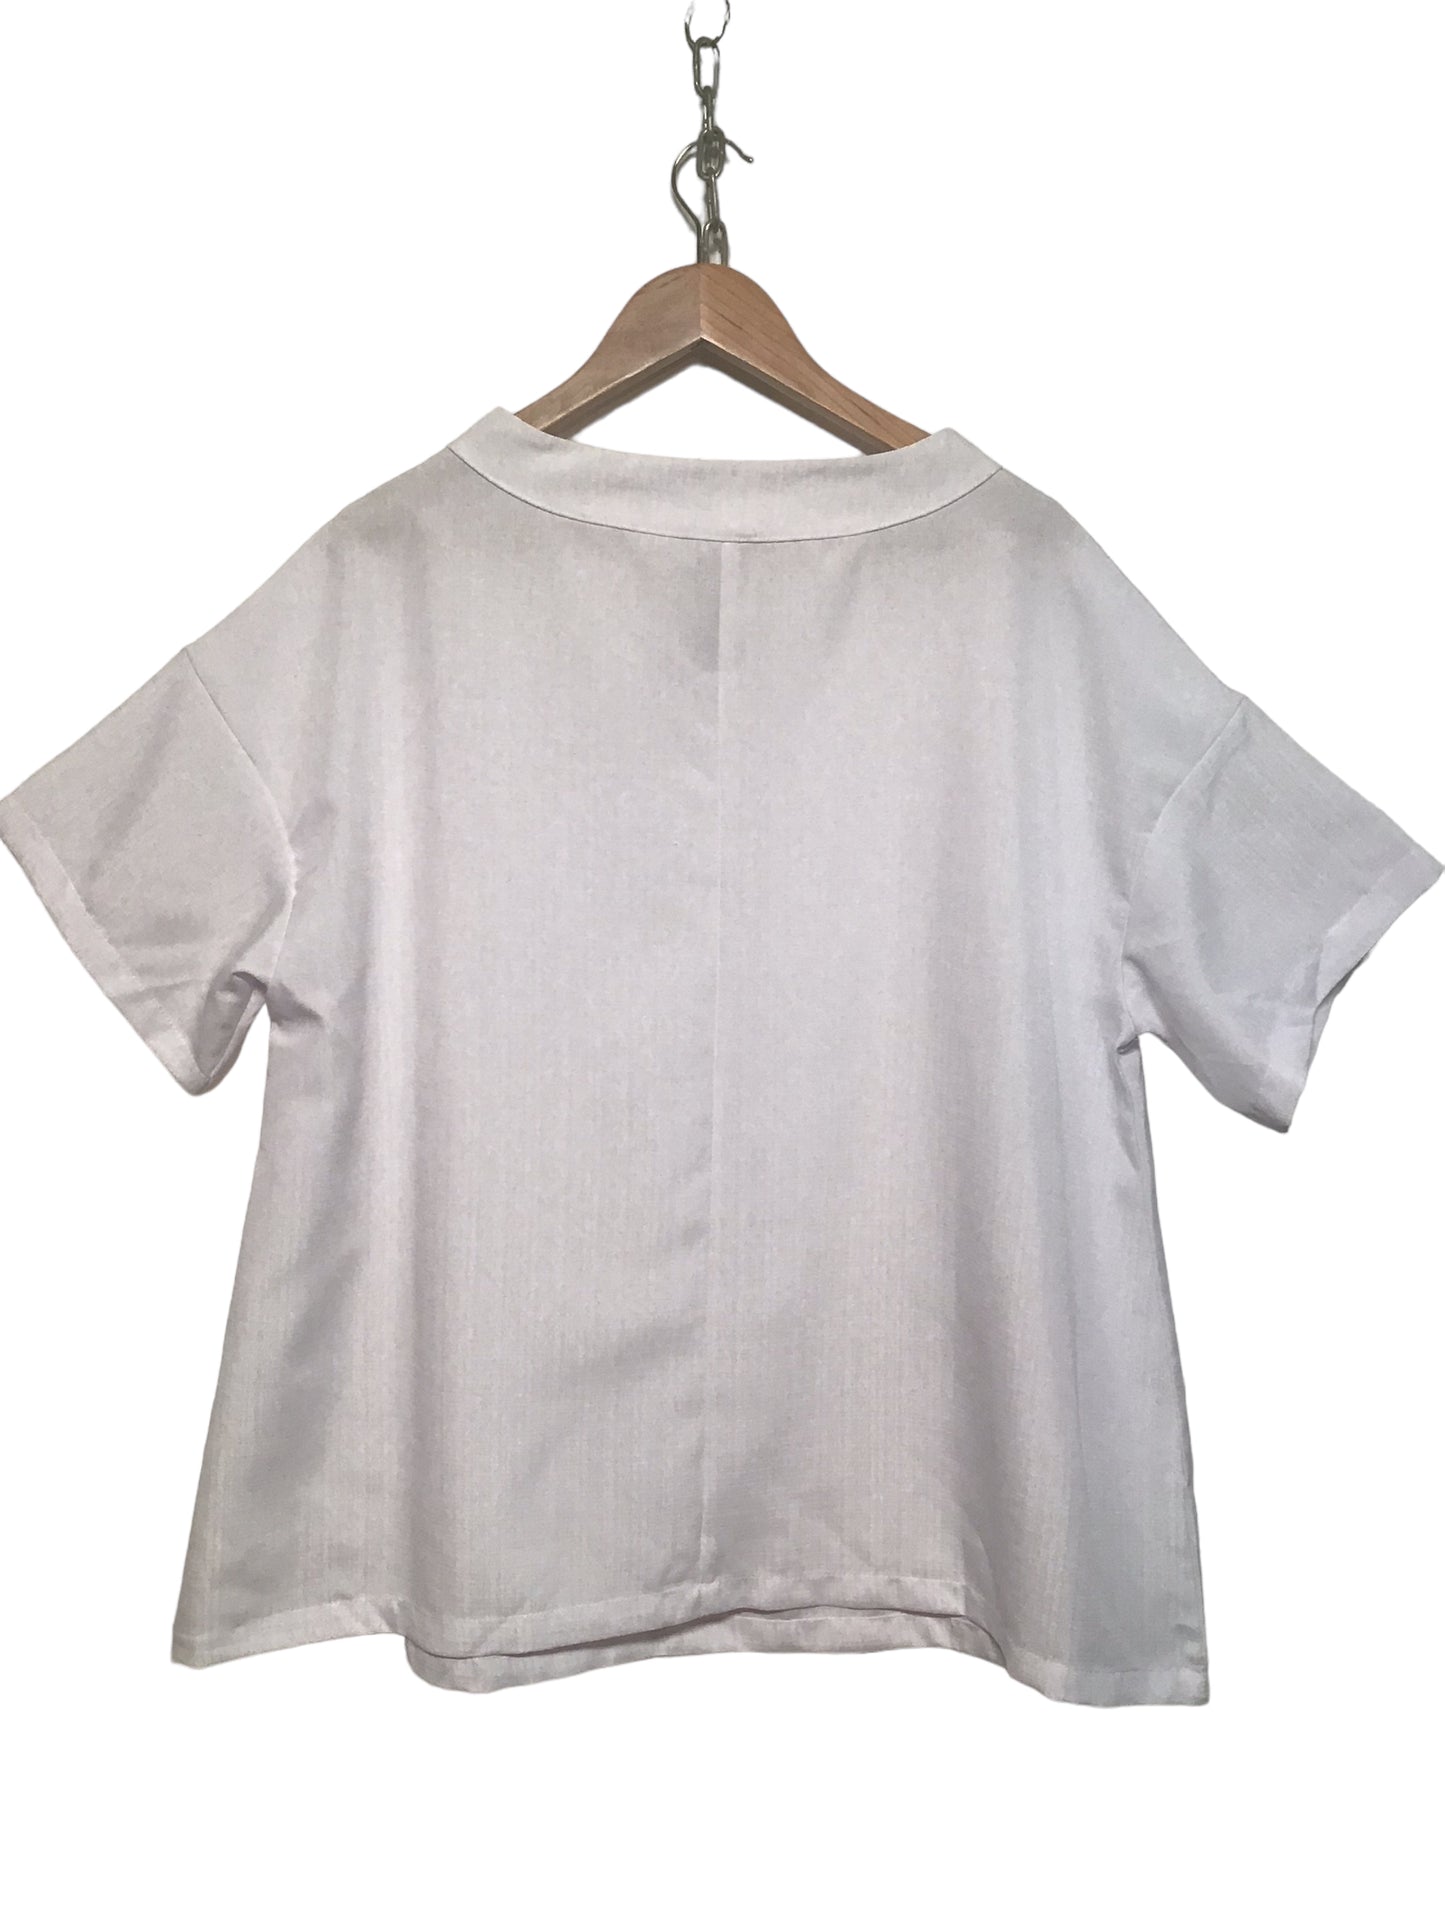 Oversized Short Sleeved Top (Size L)